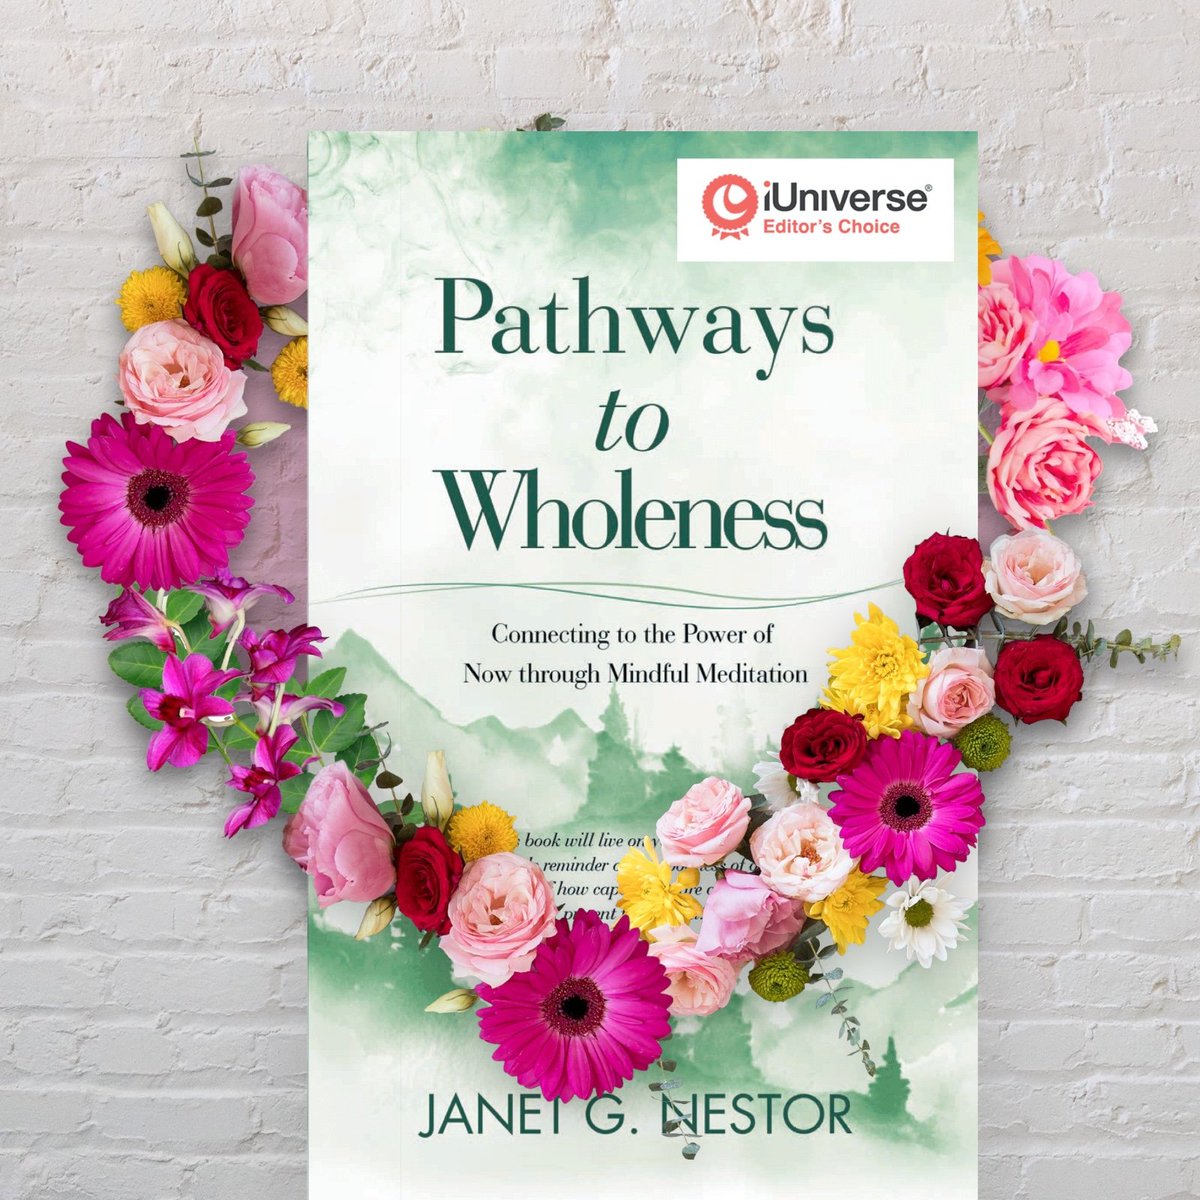 The only real goal in life is to learn what love is and share it with others.
#PathwaysToWholeness
🪷 
#AmazonBooks amzn.to/3ZjeFIx
#BarnesAndNoble bit.ly/3YWZnZD
🪷
#Spirituality #Meditation #Love #Healing #Books #BookX #BookTwitter 
🪷
#IAMChoosingLove